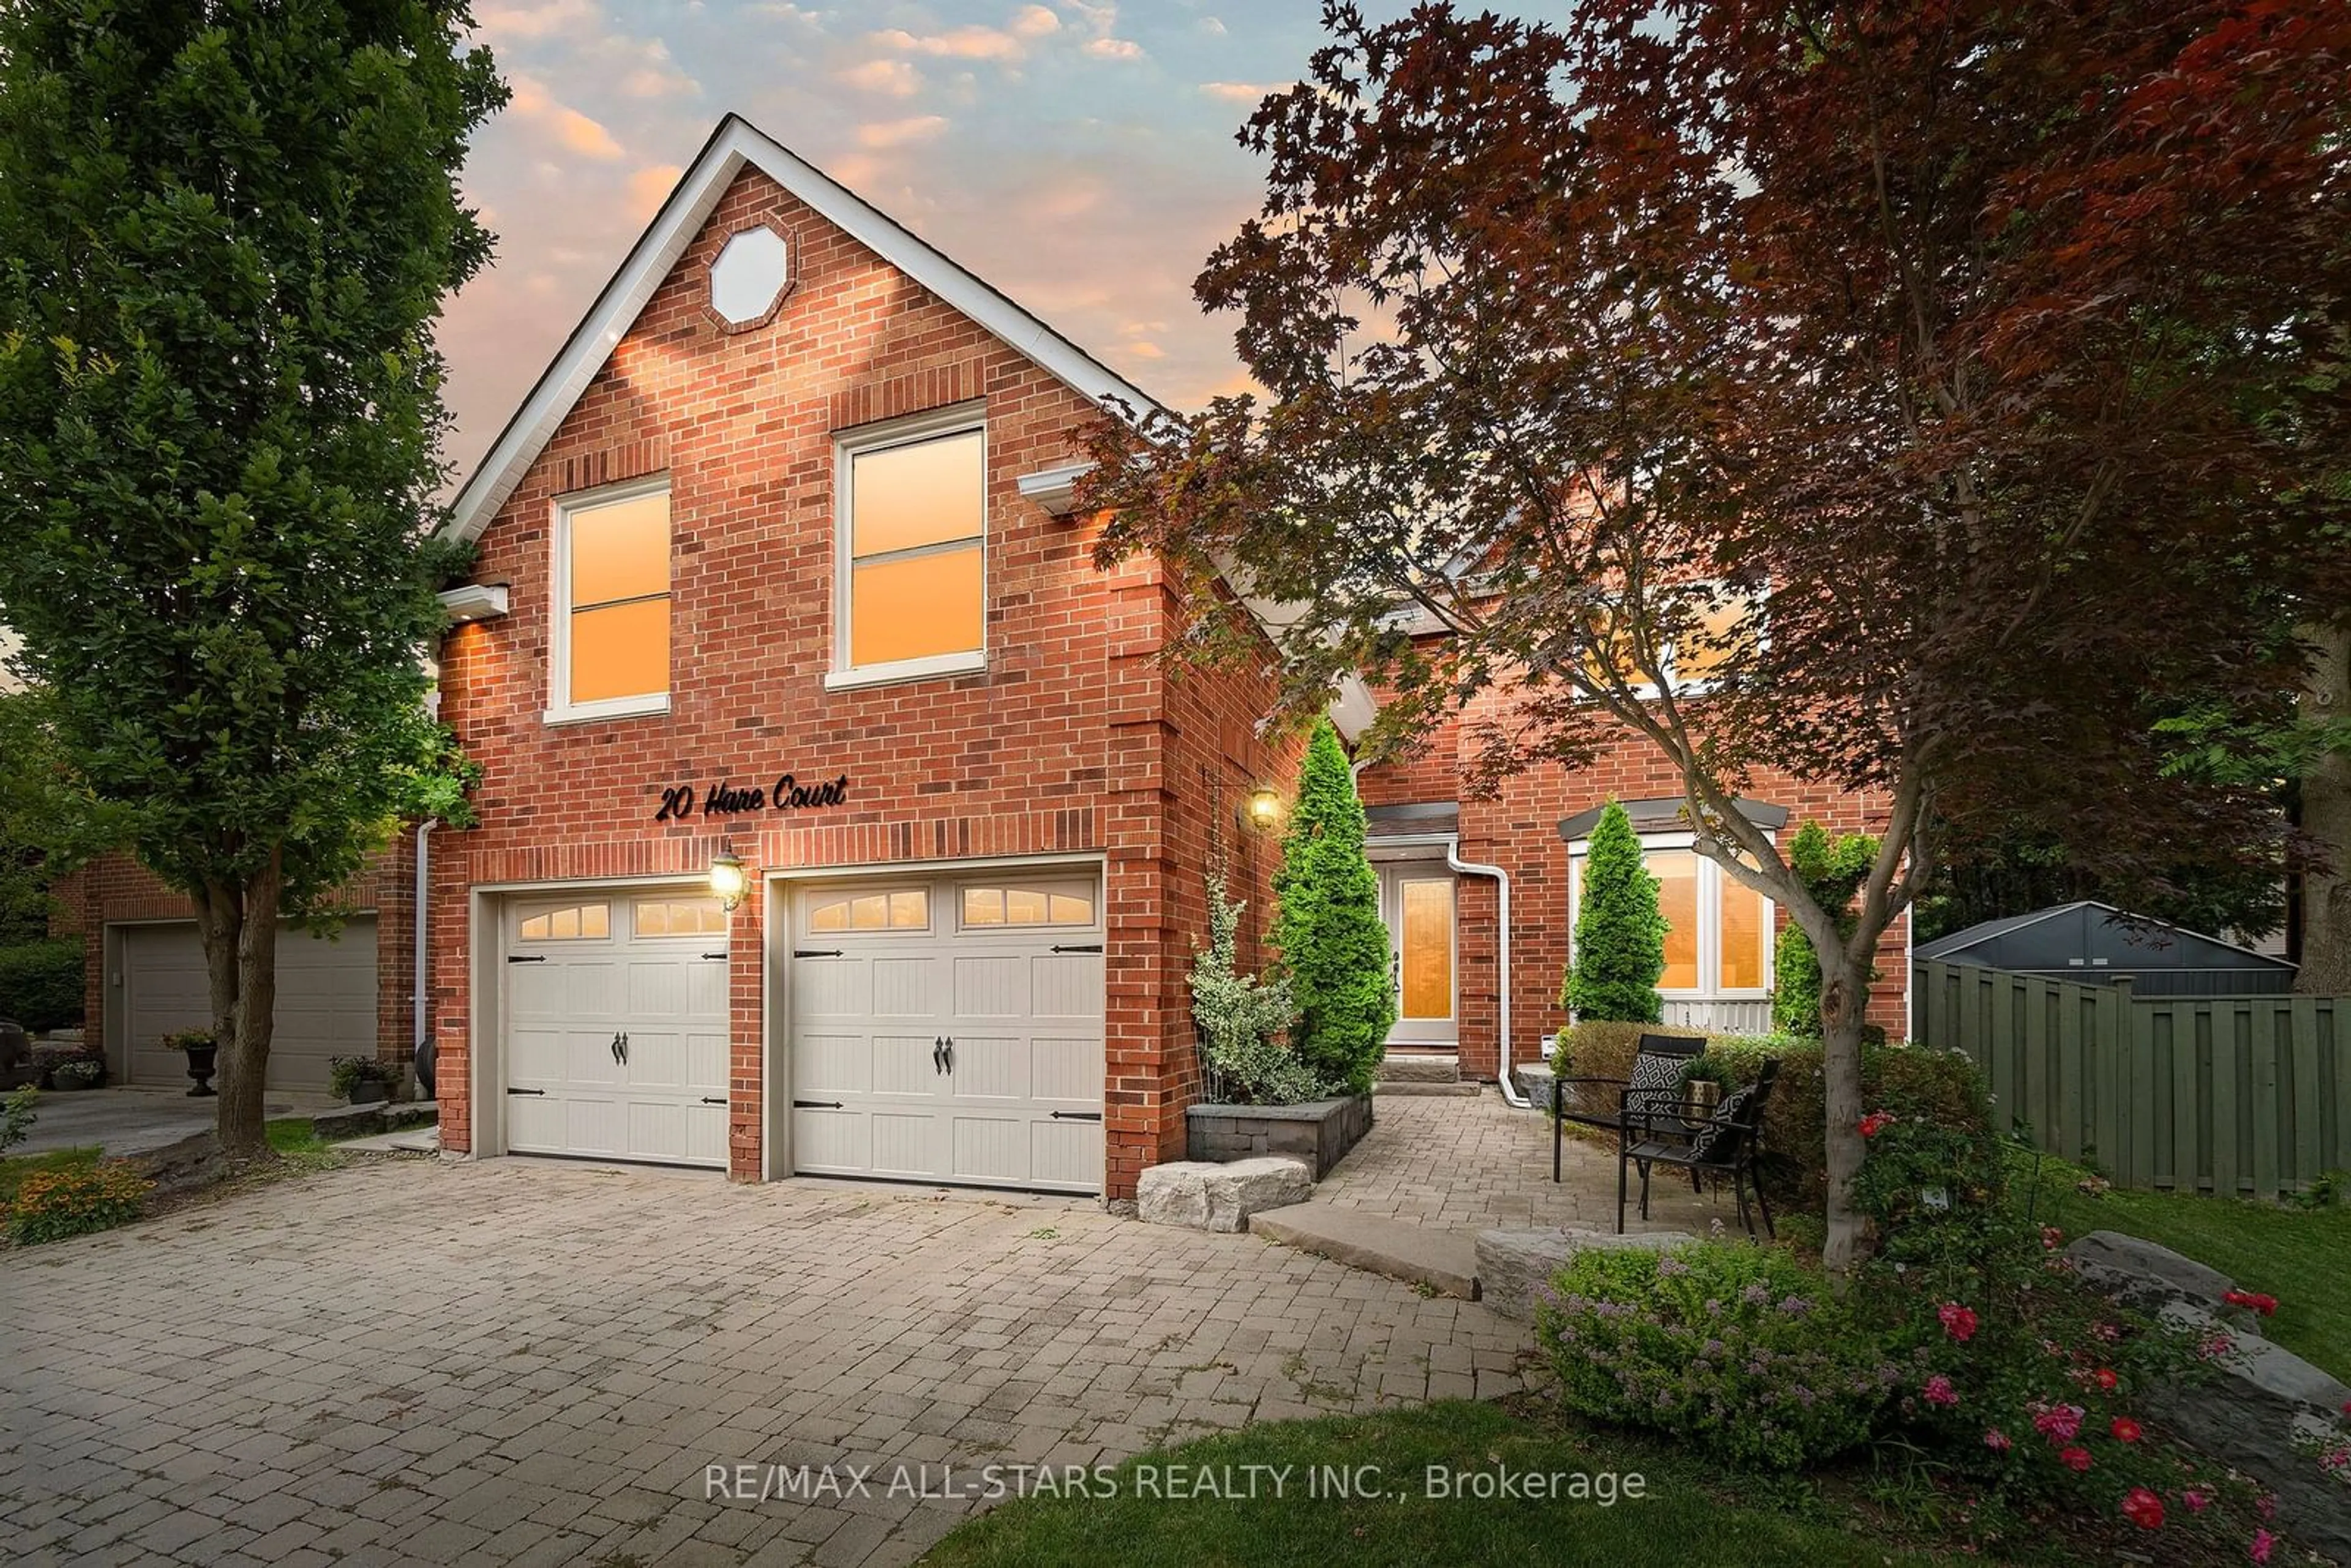 Home with brick exterior material for 20 Hare Crt, Markham Ontario L3P 4K6